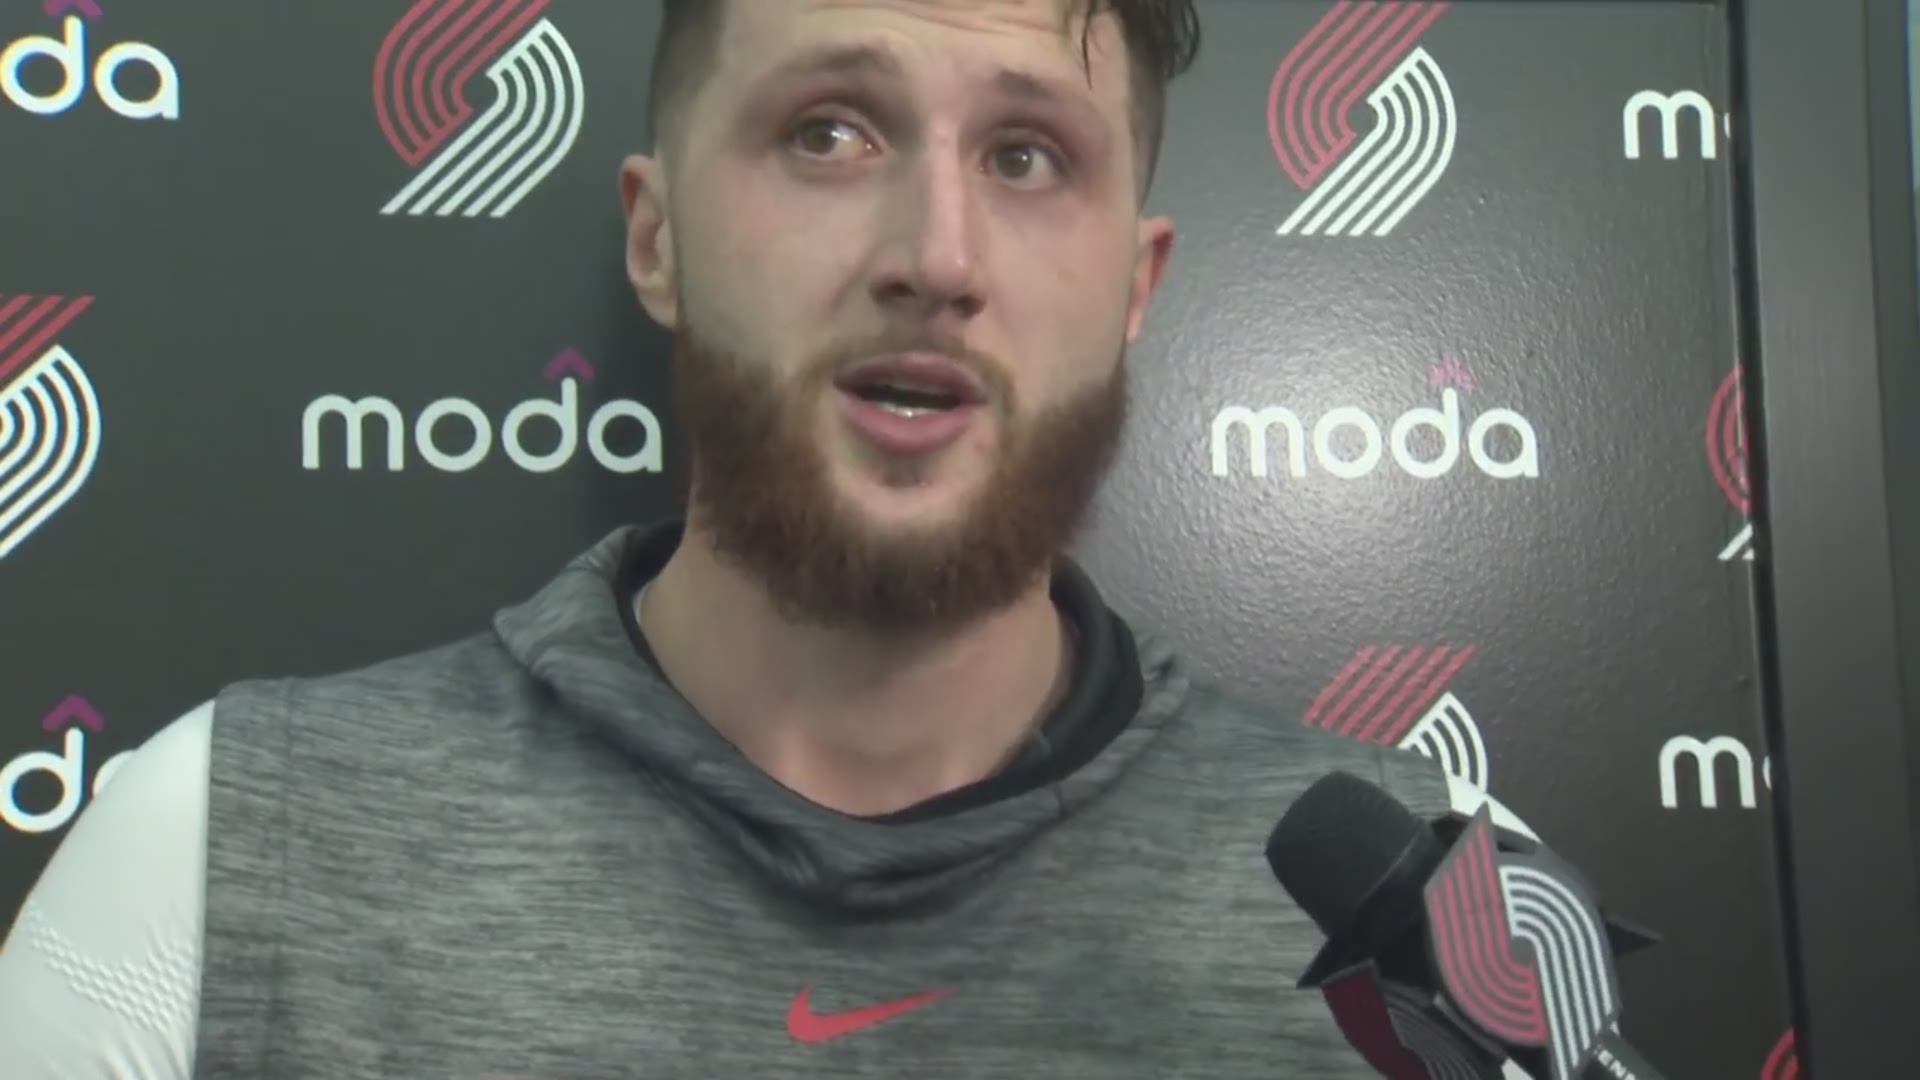 Blazers center Jusuf Nurkic talks about potentially returning March 15 against the Rockets. It's been nearly a year since he suffered a devastating leg injury.